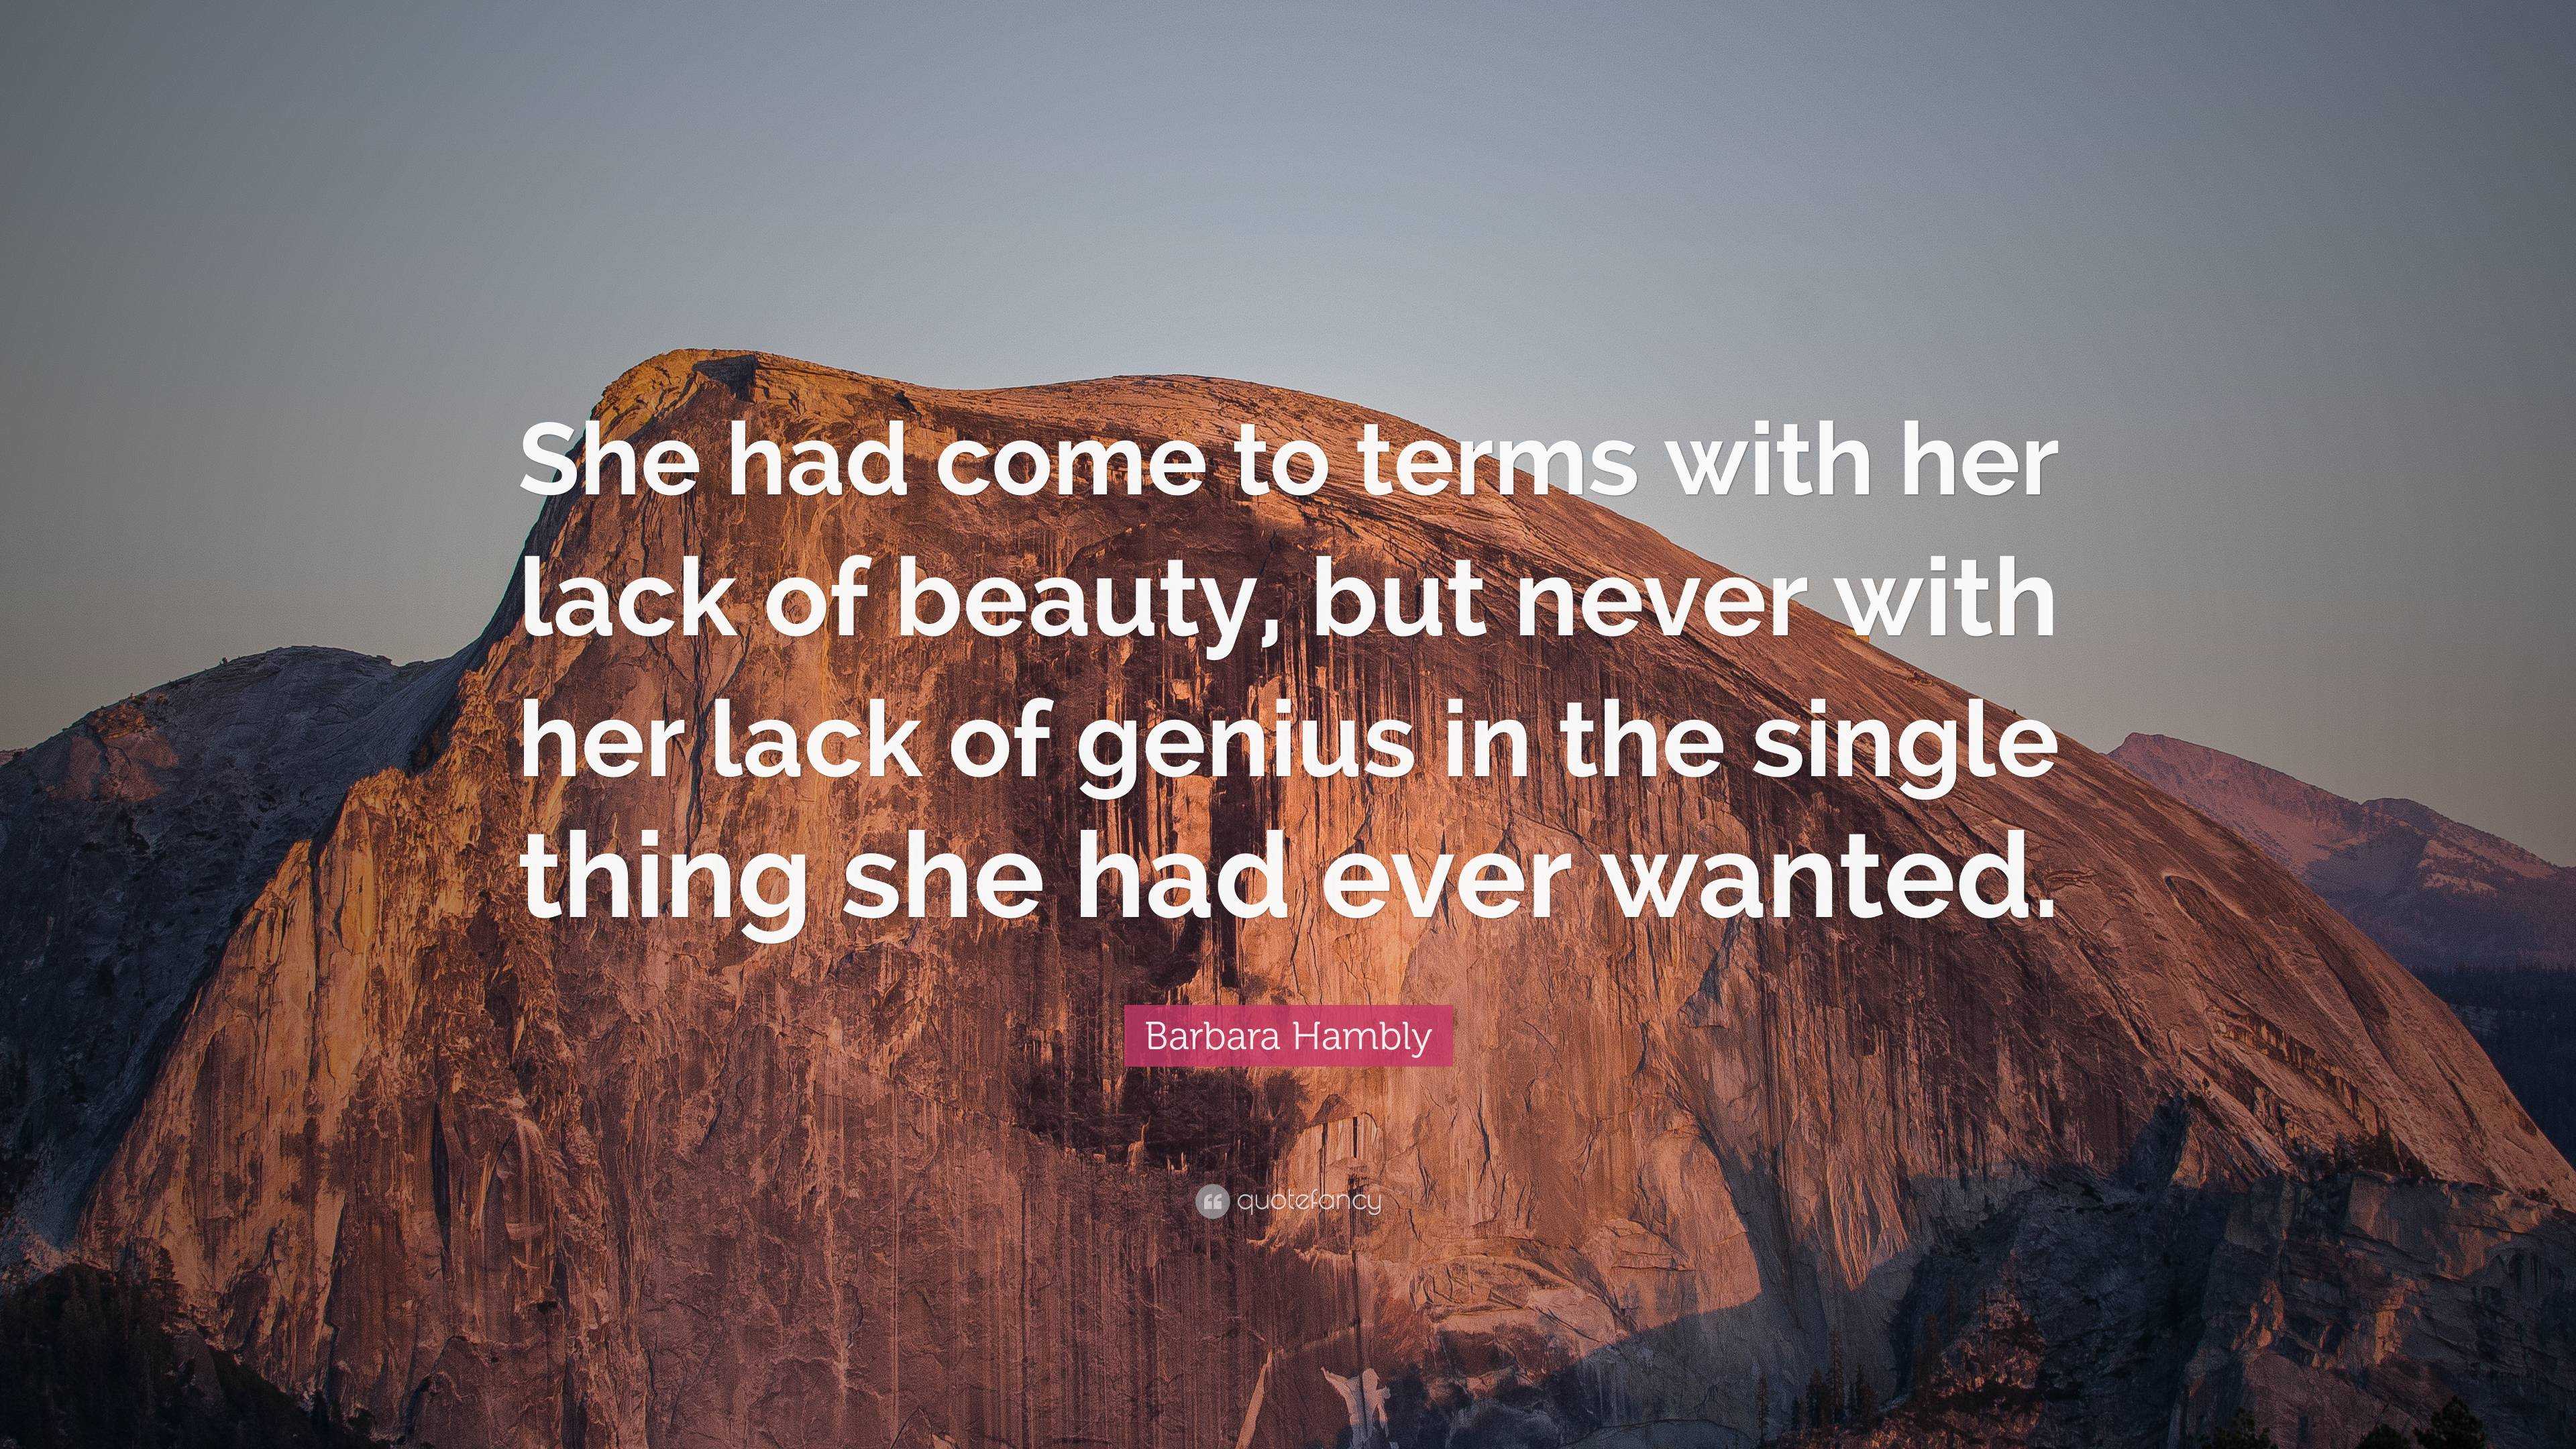 Barbara Hambly Quote: “She had come to terms with her lack of beauty ...